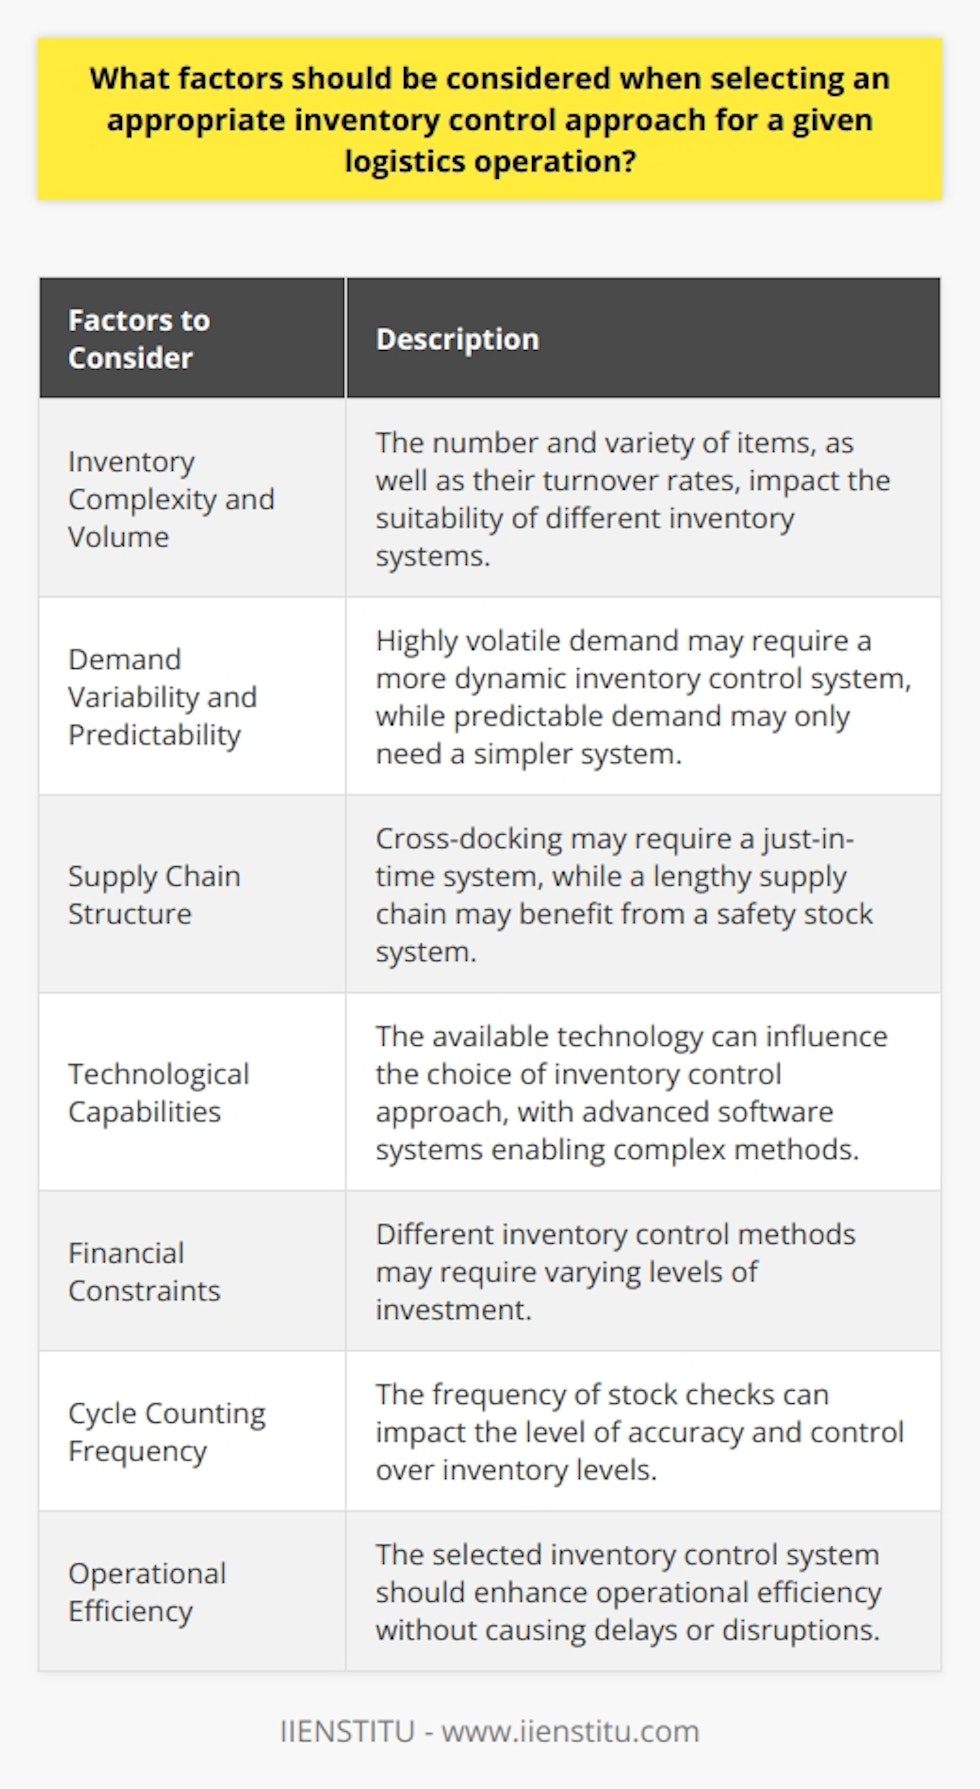 When selecting an appropriate inventory control approach for a logistics operation, there are several important factors to consider. These factors include inventory complexity and volume, demand variability and predictability, supply chain structure, technological capabilities, financial constraints, cycle counting frequency, and operational efficiency.Firstly, inventory complexity and volume play a crucial role in determining the appropriate inventory control approach. The number and variety of items, as well as their turnover rates, can impact the suitability of different inventory systems. For example, a logistics operation dealing with a large number of diverse items with high turnover rates may benefit from a more sophisticated and dynamic inventory control system.Secondly, demand variability and predictability must be taken into account. If the demand for products is highly volatile, with significant fluctuations, a more dynamic inventory control system may be necessary to ensure that stock levels are adjusted in real-time to meet customer demand. Conversely, if demand is more predictable, a simpler and more static inventory control system may suffice.The structure of the supply chain is another factor to consider. For instance, if a logistics operation involves cross-docking, where goods are quickly transferred from inbound to outbound transportation without being stored, a just-in-time inventory system may be more suitable. On the other hand, a lengthy supply chain may benefit from a more robust safety stock system to account for potential delays or disruptions.Technological capabilities also play a vital role. The available technology within an organization can influence the choice of inventory control approach. Advanced software systems can handle complex inventory control methods, such as demand forecasting and inventory optimization, while manual methods may limit a company to simpler systems.Financial constraints are another important consideration. Different inventory control methods may require varying levels of investment in technology and staff training. It is essential to find a balance between inventory costs and customer service levels, aiming to minimize costs while maintaining customer satisfaction.Cycle counting frequency, or how often stock checks are conducted, should also be taken into account. A system with a frequent cycle counting schedule can help maintain a high level of accuracy and control over inventory levels.Lastly, the overall operational efficiency must be considered. The selected inventory control system should enhance operational efficiency without causing delays or disruptions for the logistics operation. The ultimate goal of any logistics operation is to deliver goods efficiently, promptly, and accurately.In conclusion, multiple factors should be considered when selecting an appropriate inventory control approach for a logistics operation. These include inventory complexity and volume, demand variability and predictability, supply chain structure, technological capabilities, financial constraints, cycle counting frequency, and operational efficiency. By considering these factors and striking a balance across them, companies can optimize their inventory management and meet customer demands efficiently and effectively.